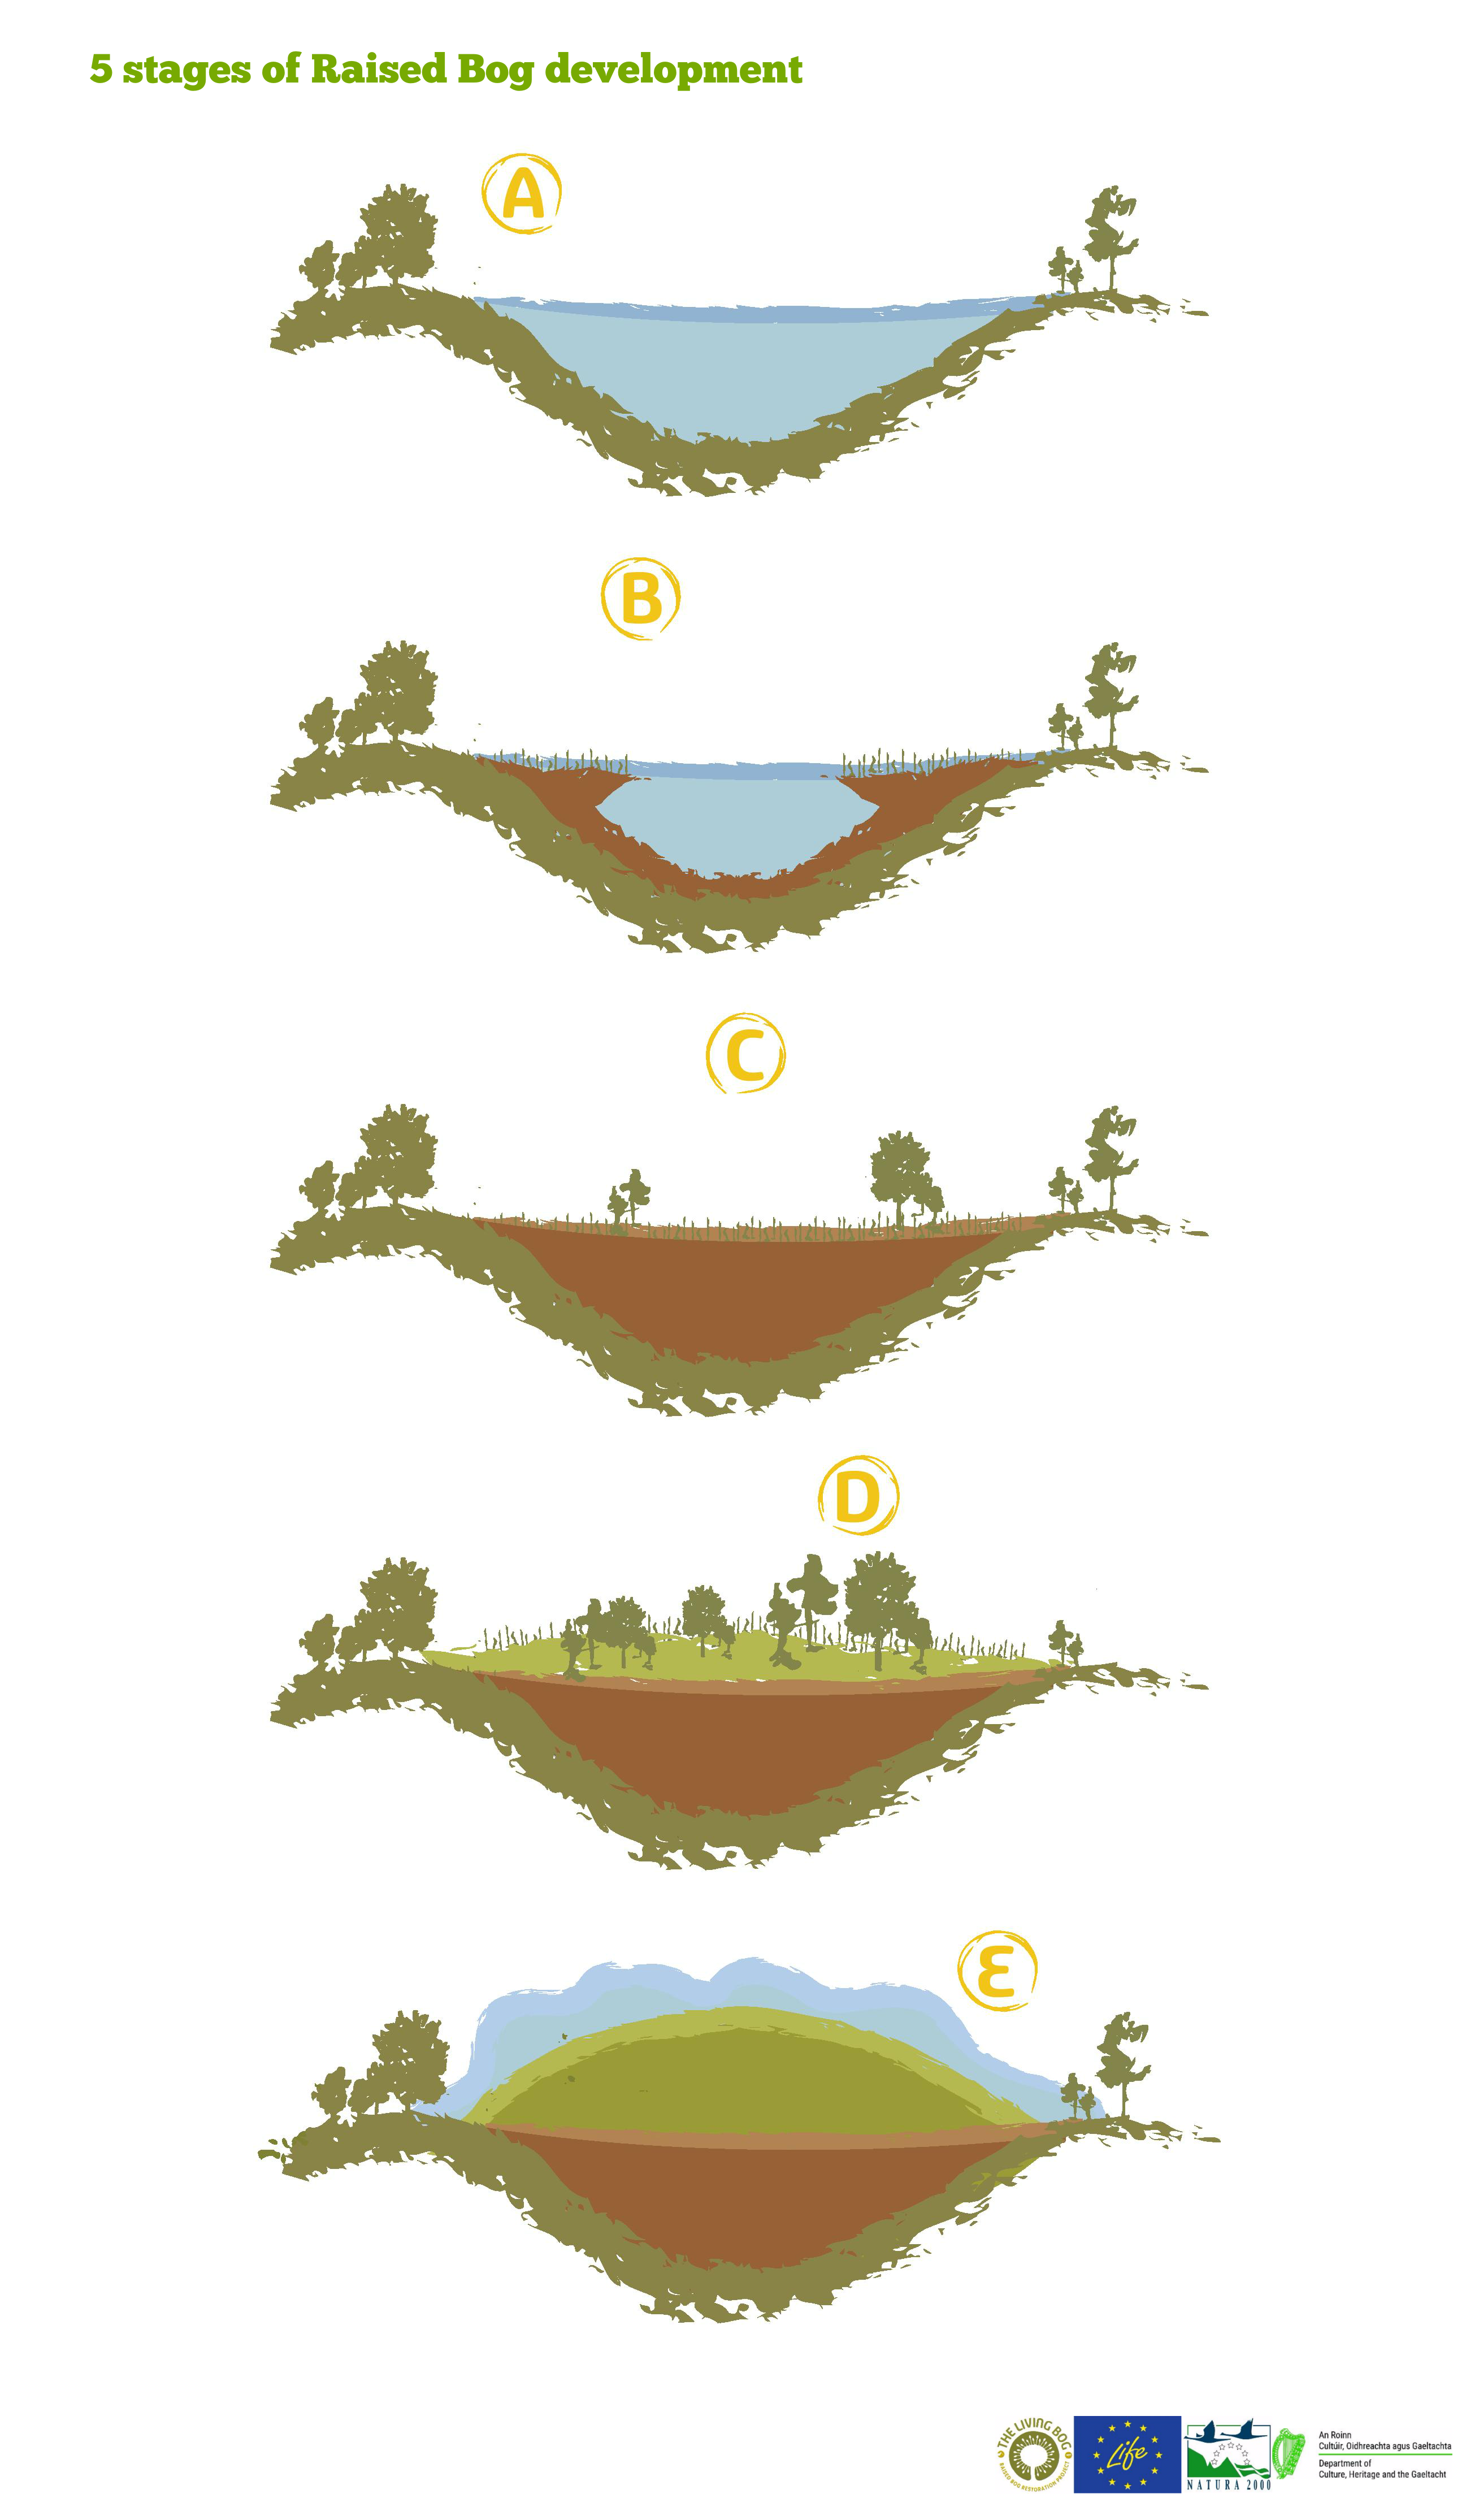 The Five Stages of Raised Bog Development